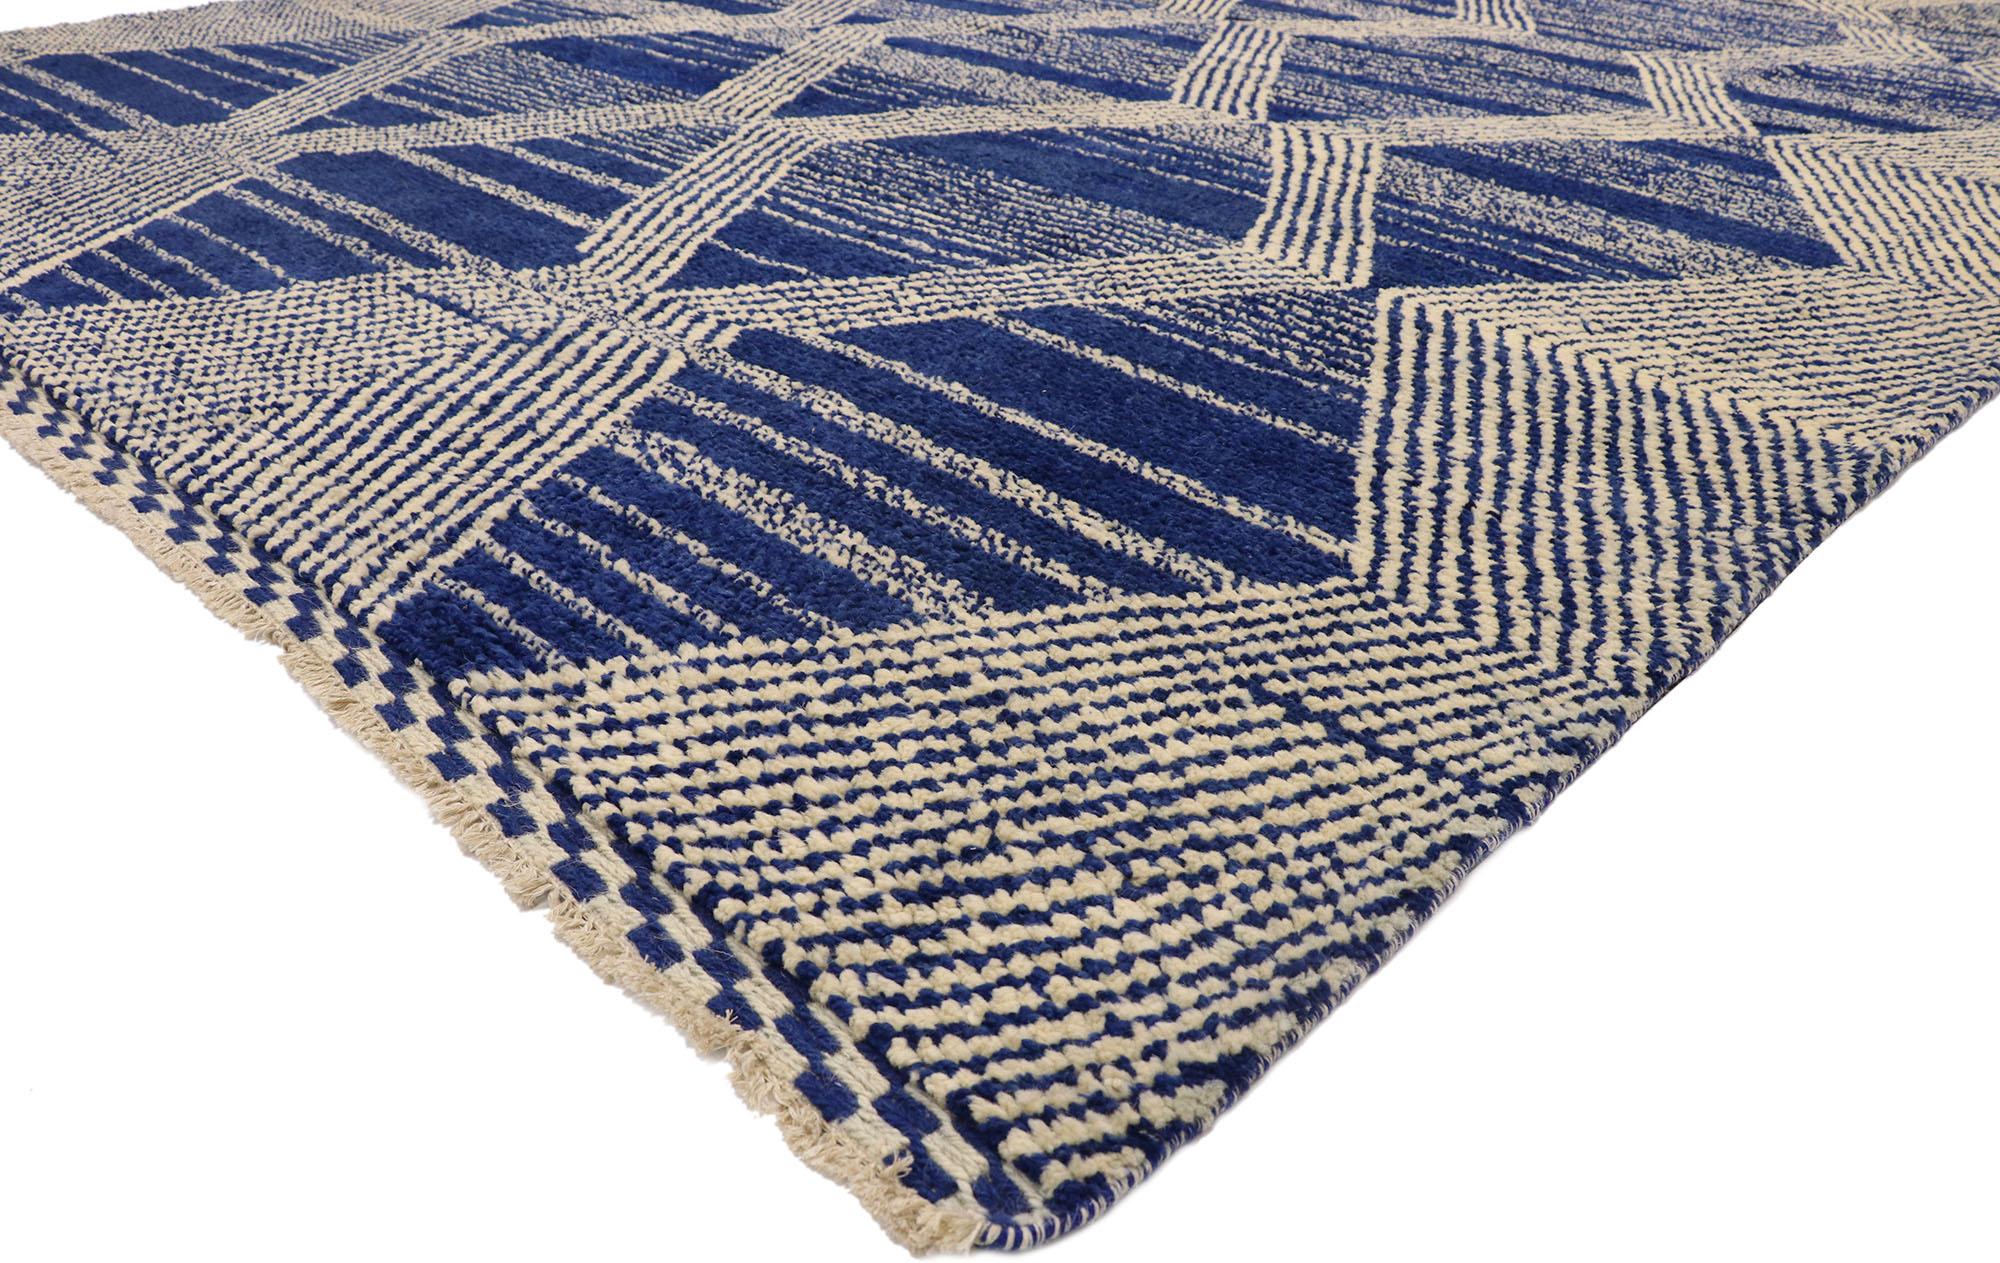 80563 Modern Style Blue Moroccan Area Rug, 10'00 x 13'11.
Cozy nomad meets Deconstructivist style in this hand knotted wool Moroccan area rug. The conceptual design elements and visually striking colors woven into this piece work together creating a